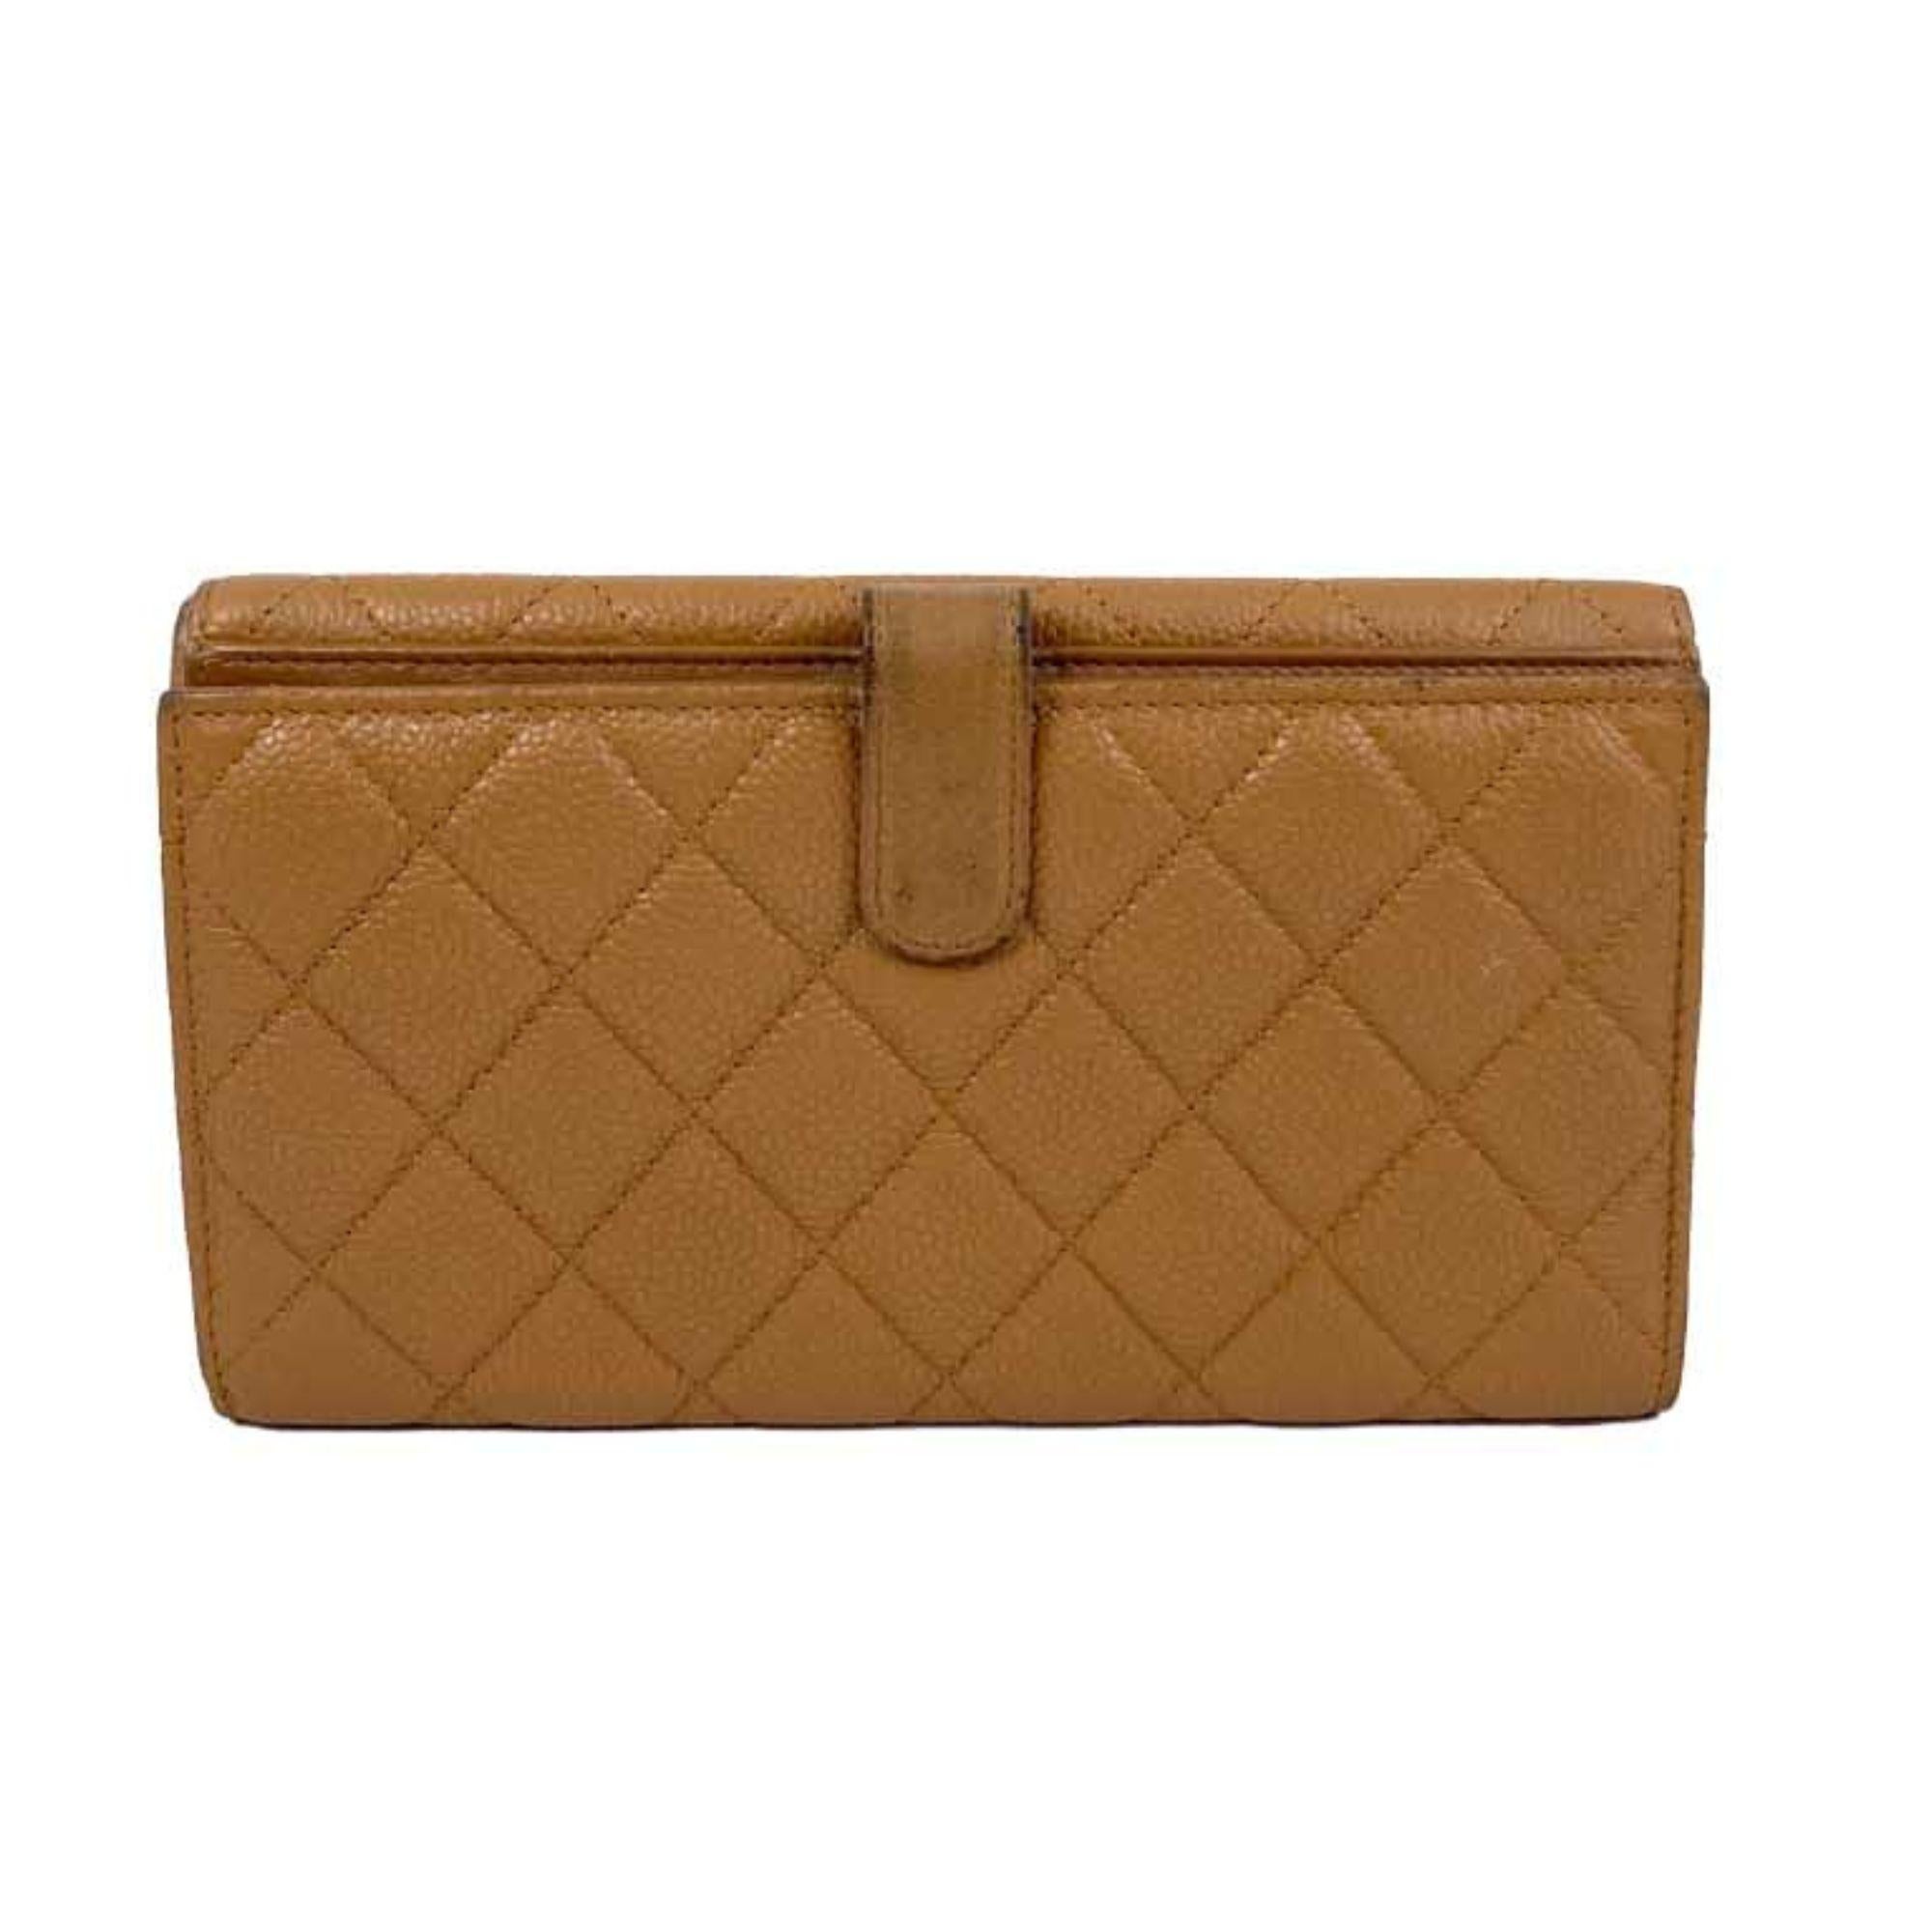 Chanel light brown quilted leather wallet. 
Serial Number: 15851553

Material: Leather
Height: 11cm
Width: 19cm
Depth: 1.5cm
Overall condition: Great
Interior condition: Signs of use
External condition: Leather scuffing and discoloration

